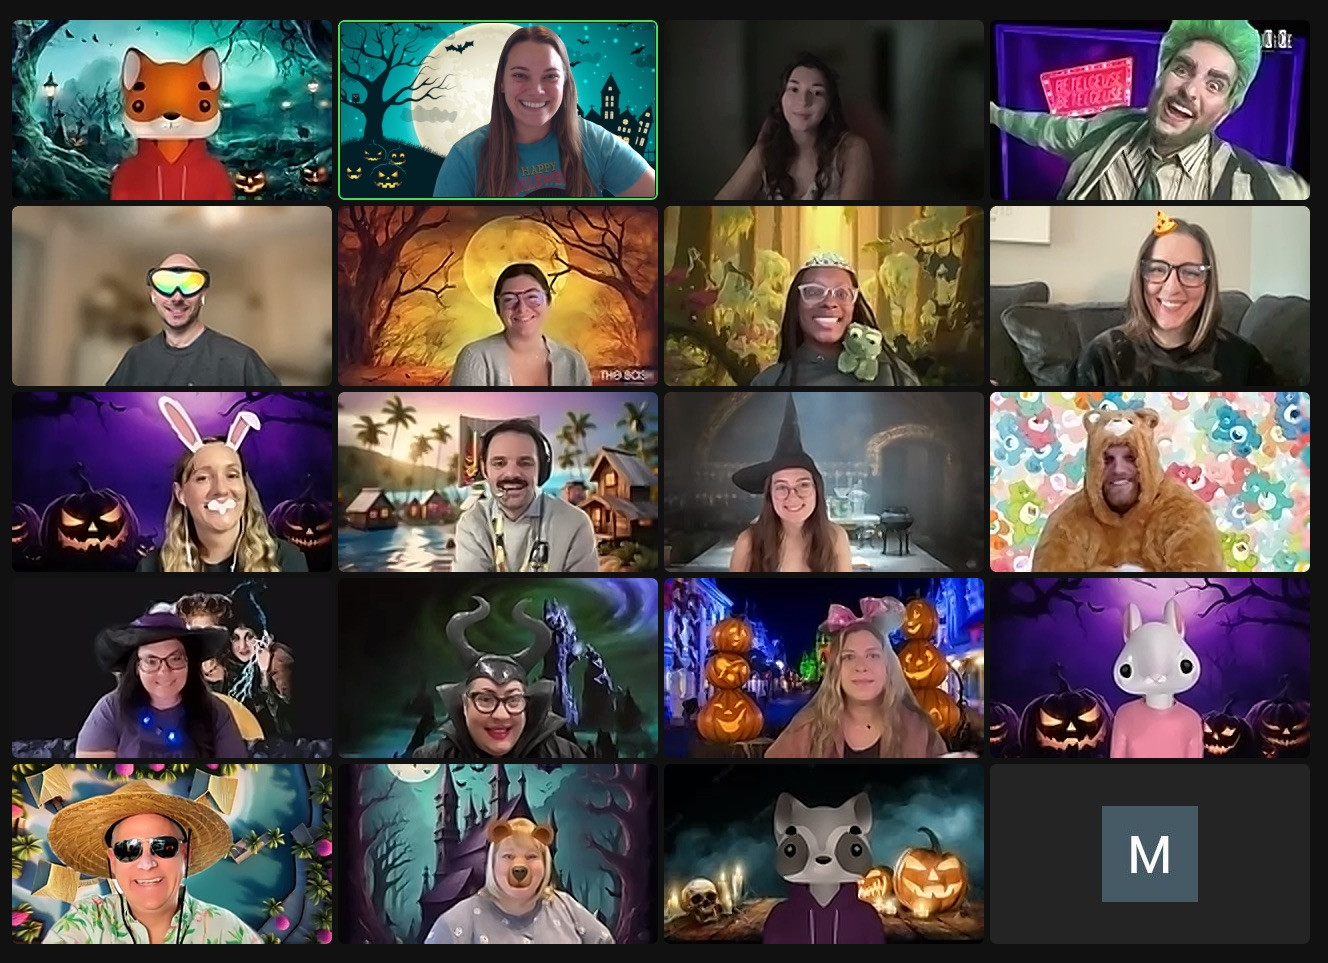 IZEAns know how to have fun virtually, especially at Halloween time!